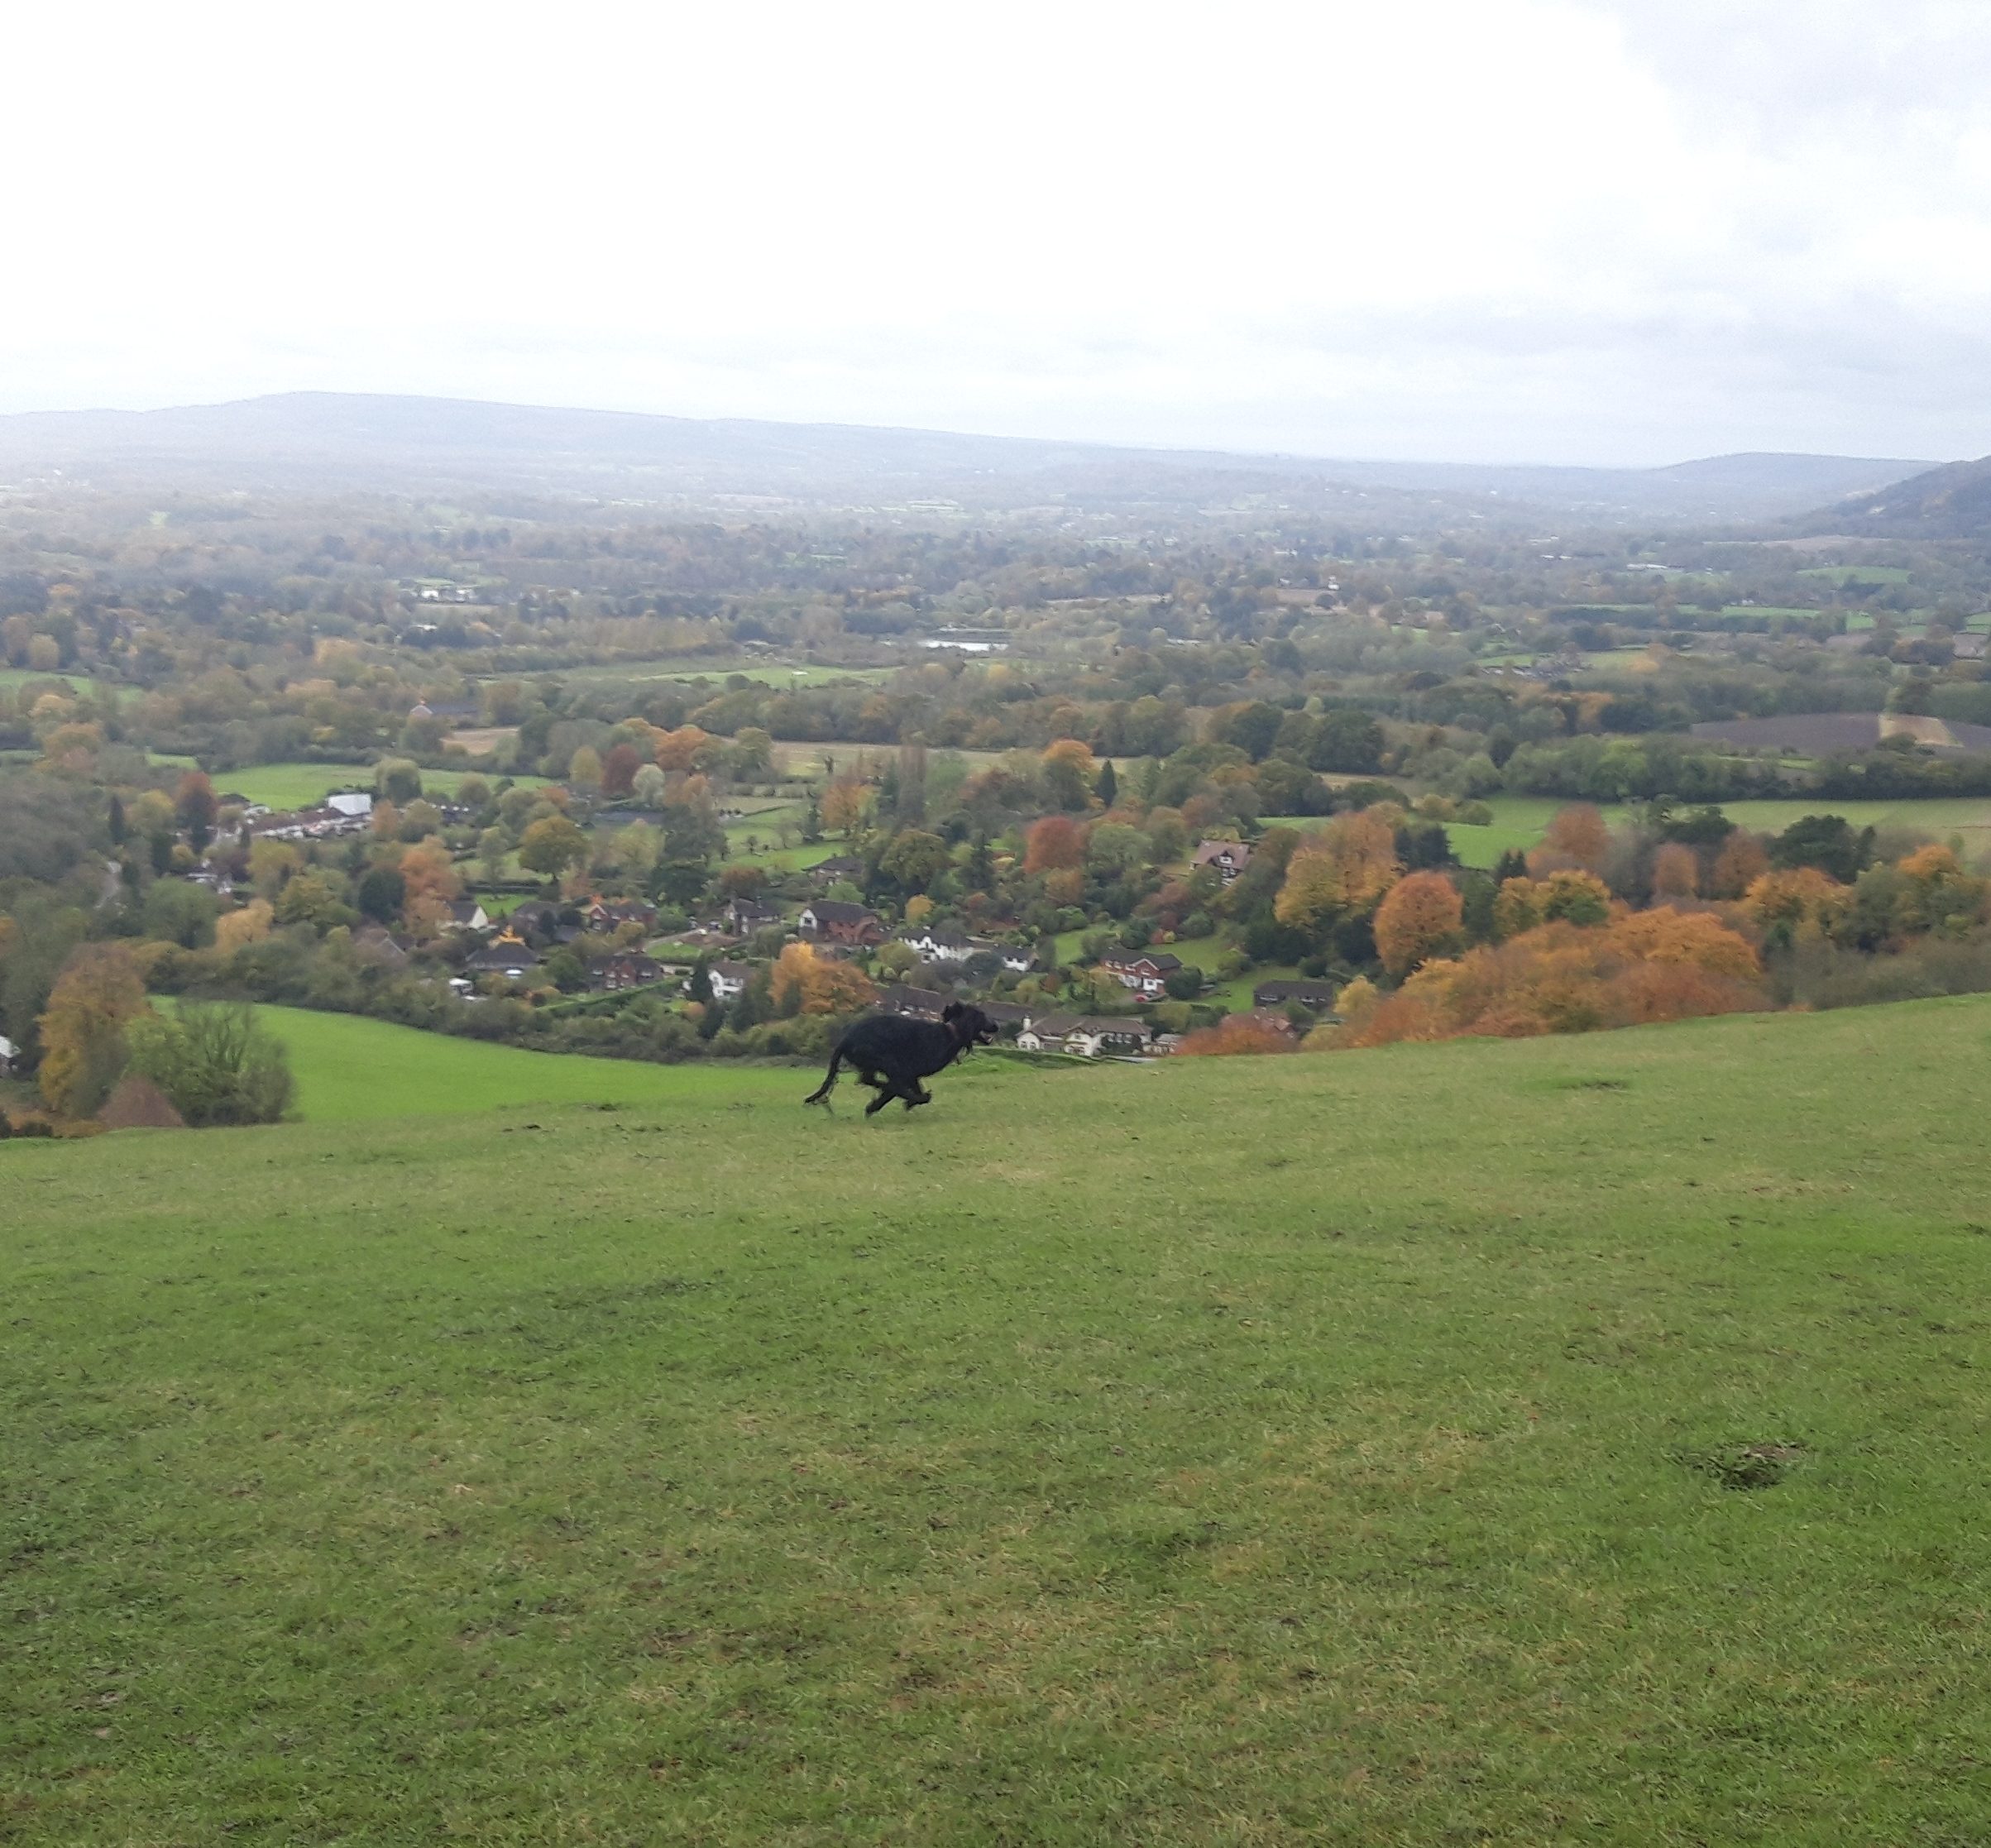 Dog galloping on Reigate Hill